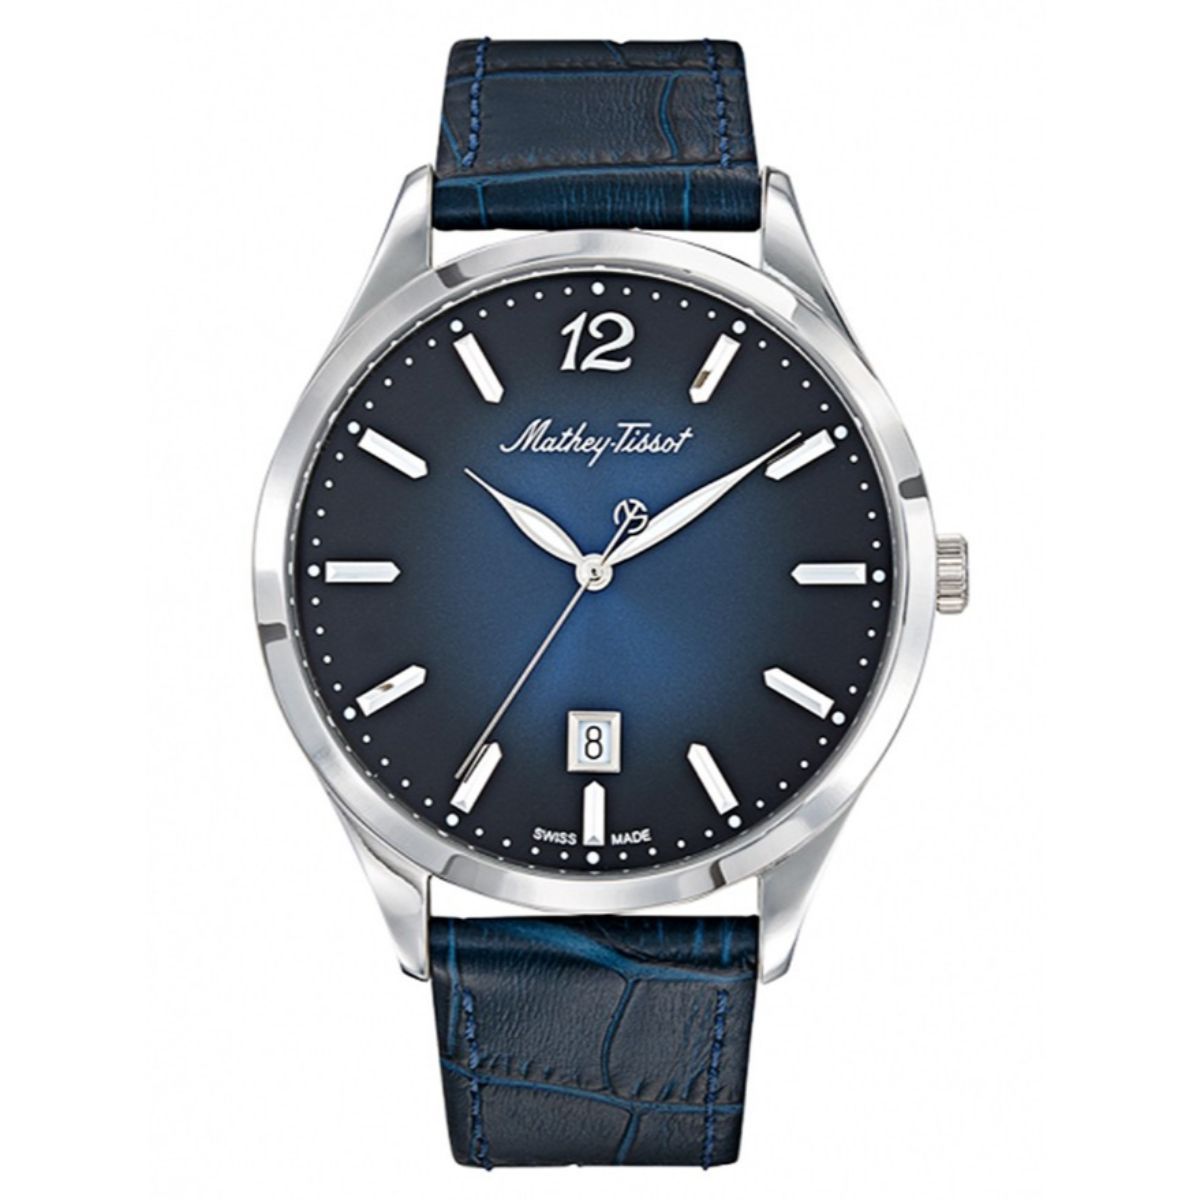 Mathey-Tissot Blue Dial Analogue Watches For Men - H411ABU